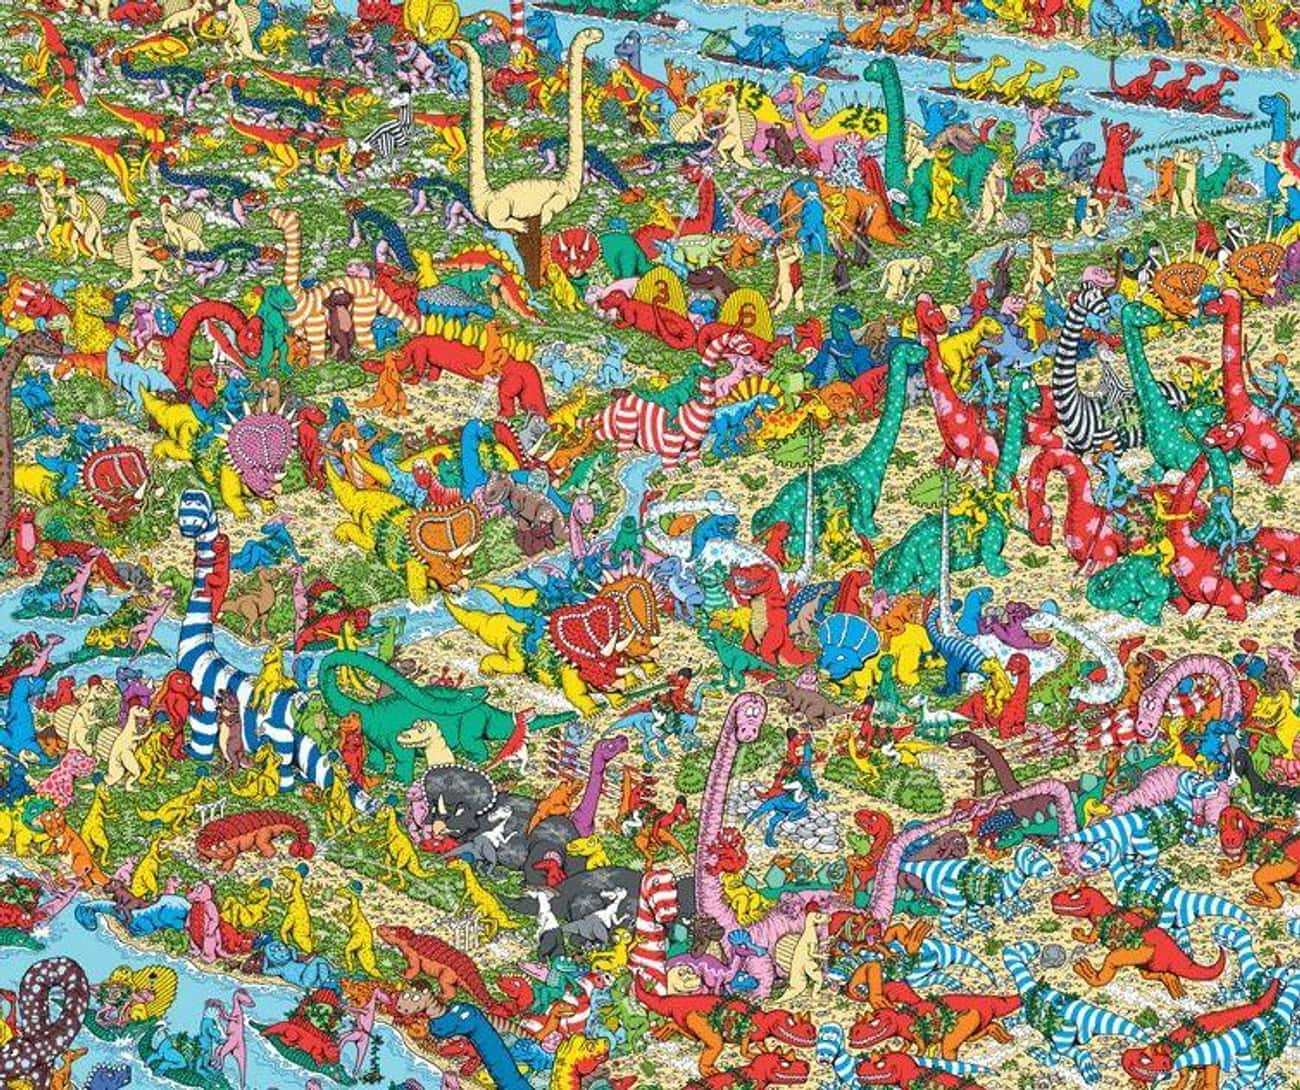 Many Schools And Colleges Have 'Where's Waldo?' Societies